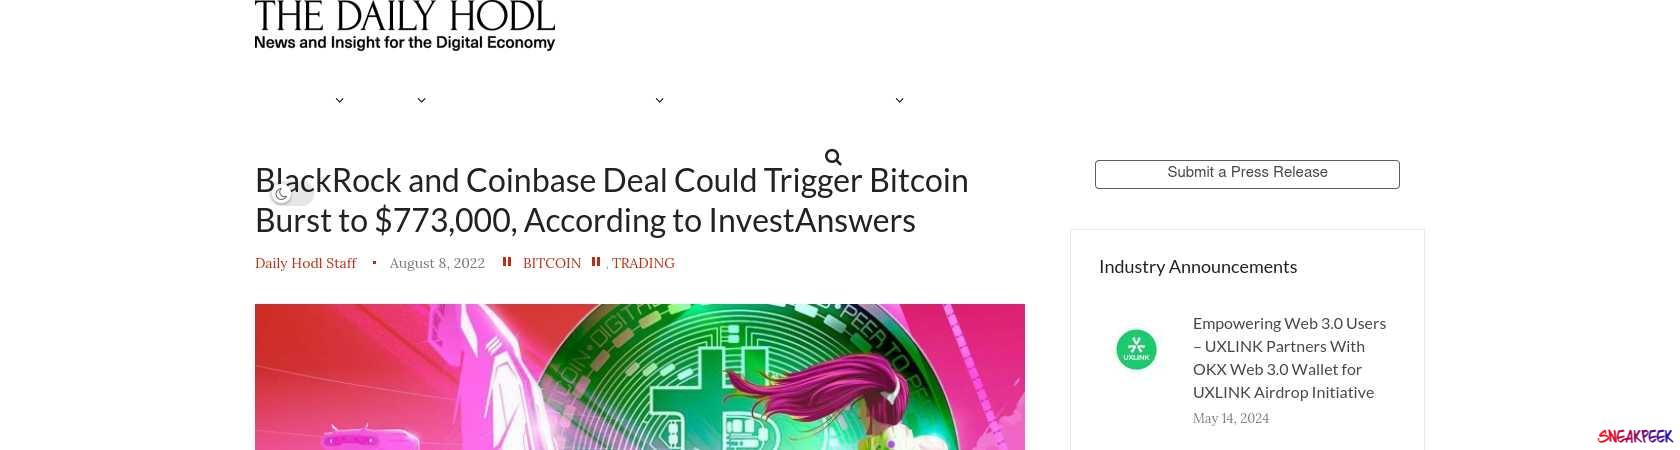 Read the full Article:  ⭲ BlackRock and Coinbase Deal Could Trigger Bitcoin Burst to $773,000, According to InvestAnswers